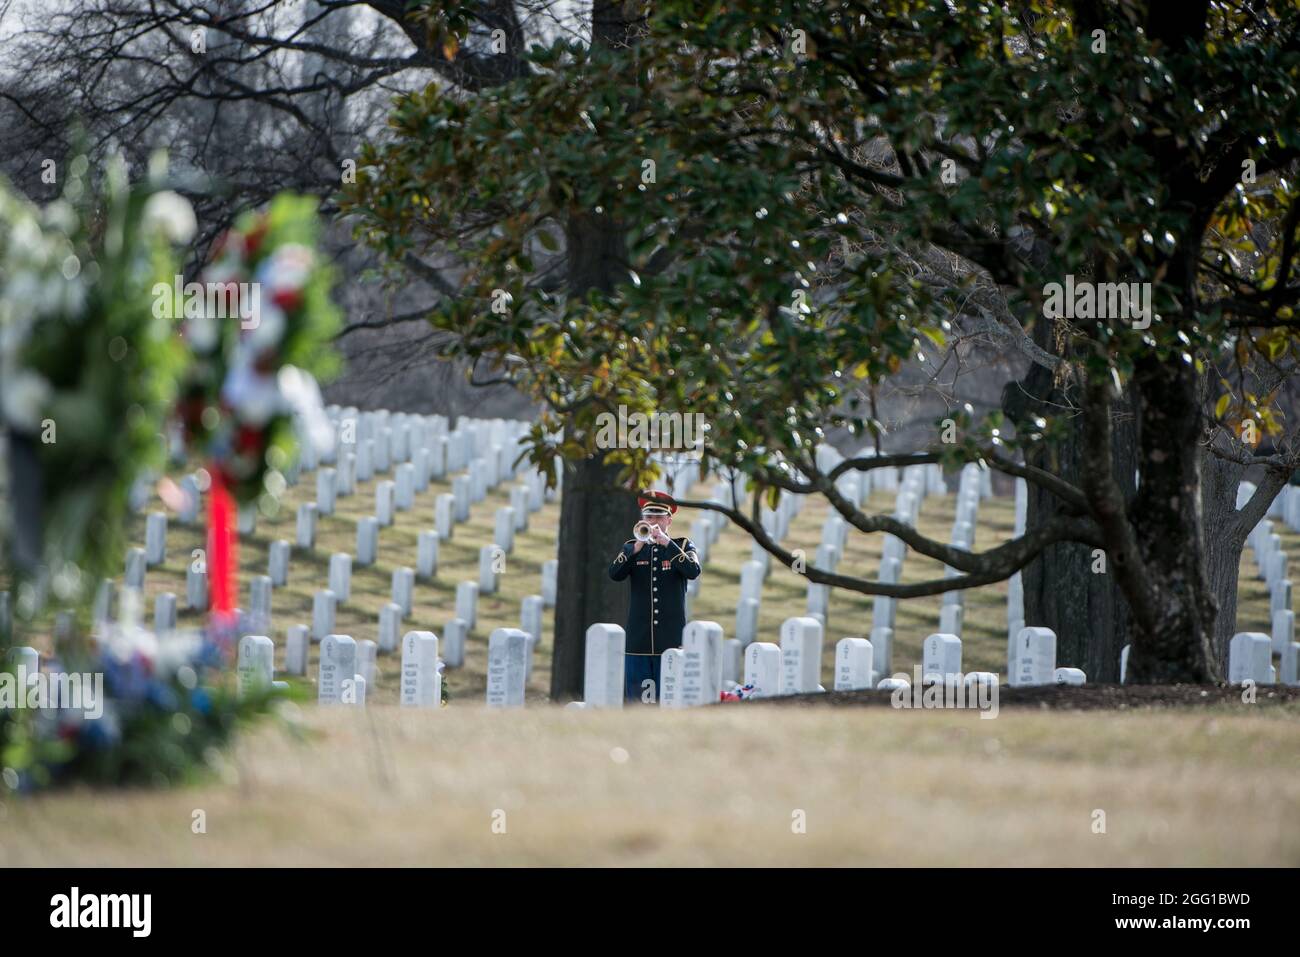 A bugler from The U.S. Army Band, “Pershing’s Own”, plays taps during the funeral of U.S. Army Sgt. 1st Class Mihail Golin in Section 60 of Arlington National Cemetery, Arlington, Virginia, Jan. 22, 2018. Golin, an 18B Special Forces Weapons Sergeant assigned to 10th Special Forces Group (Airborne) died Jan. 1, 2018, as a result of wounds sustained while engaged in combat operations in Nangarhar Province, Afghanistan.  Golin deployed to Afghanistan in September 2017 with the 2nd Battalion, 10th Special Forces Group, in support of Operation Freedom’s Sentinel.  Golin enlisted Jan. 5, 2005 and t Stock Photo